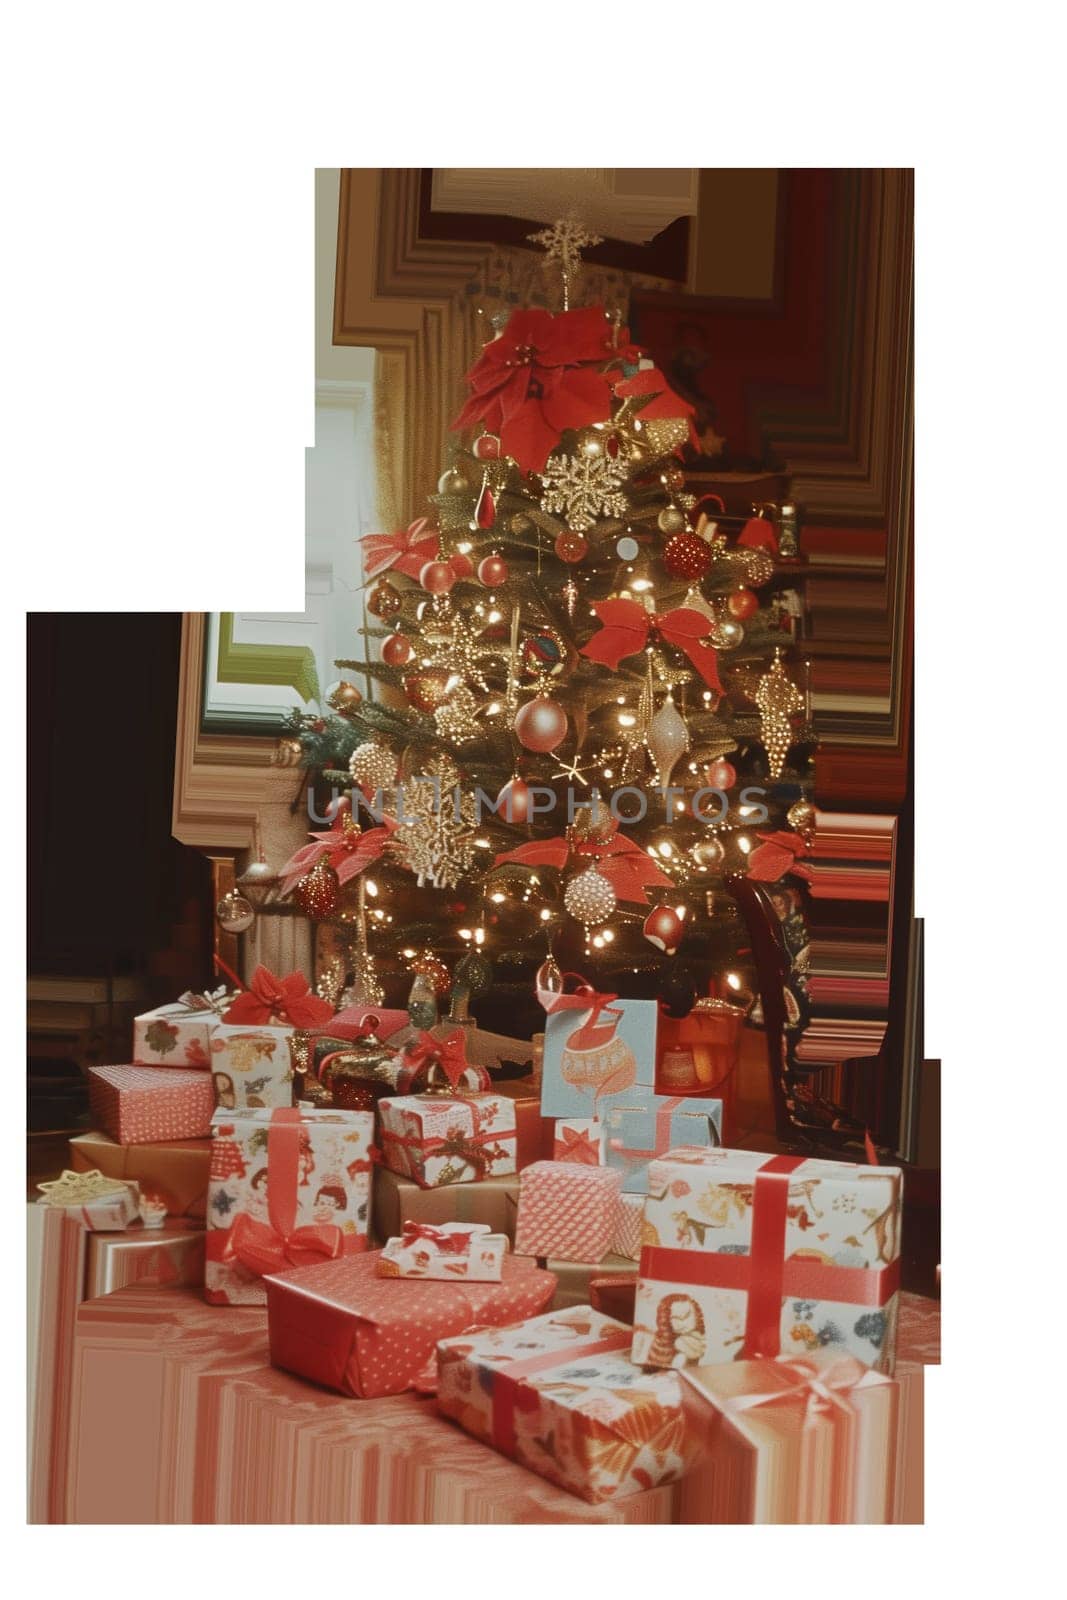 Christmas tree with giftboxes old fashioned photo by Dustick